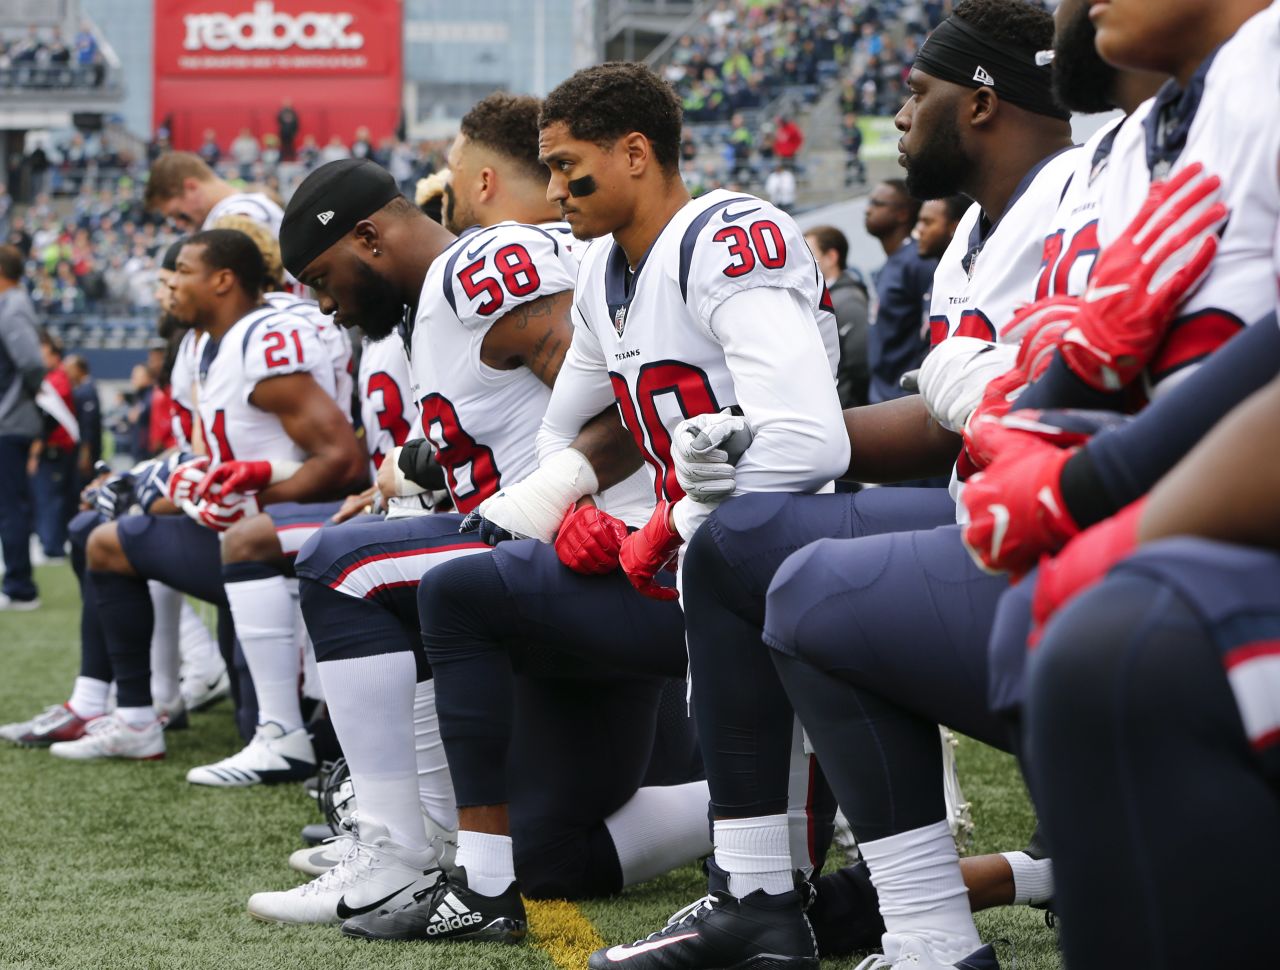 Members of the Houston Texans kneel during the National Anthem before the game at CenturyLink Field on October 29 in Seattle.